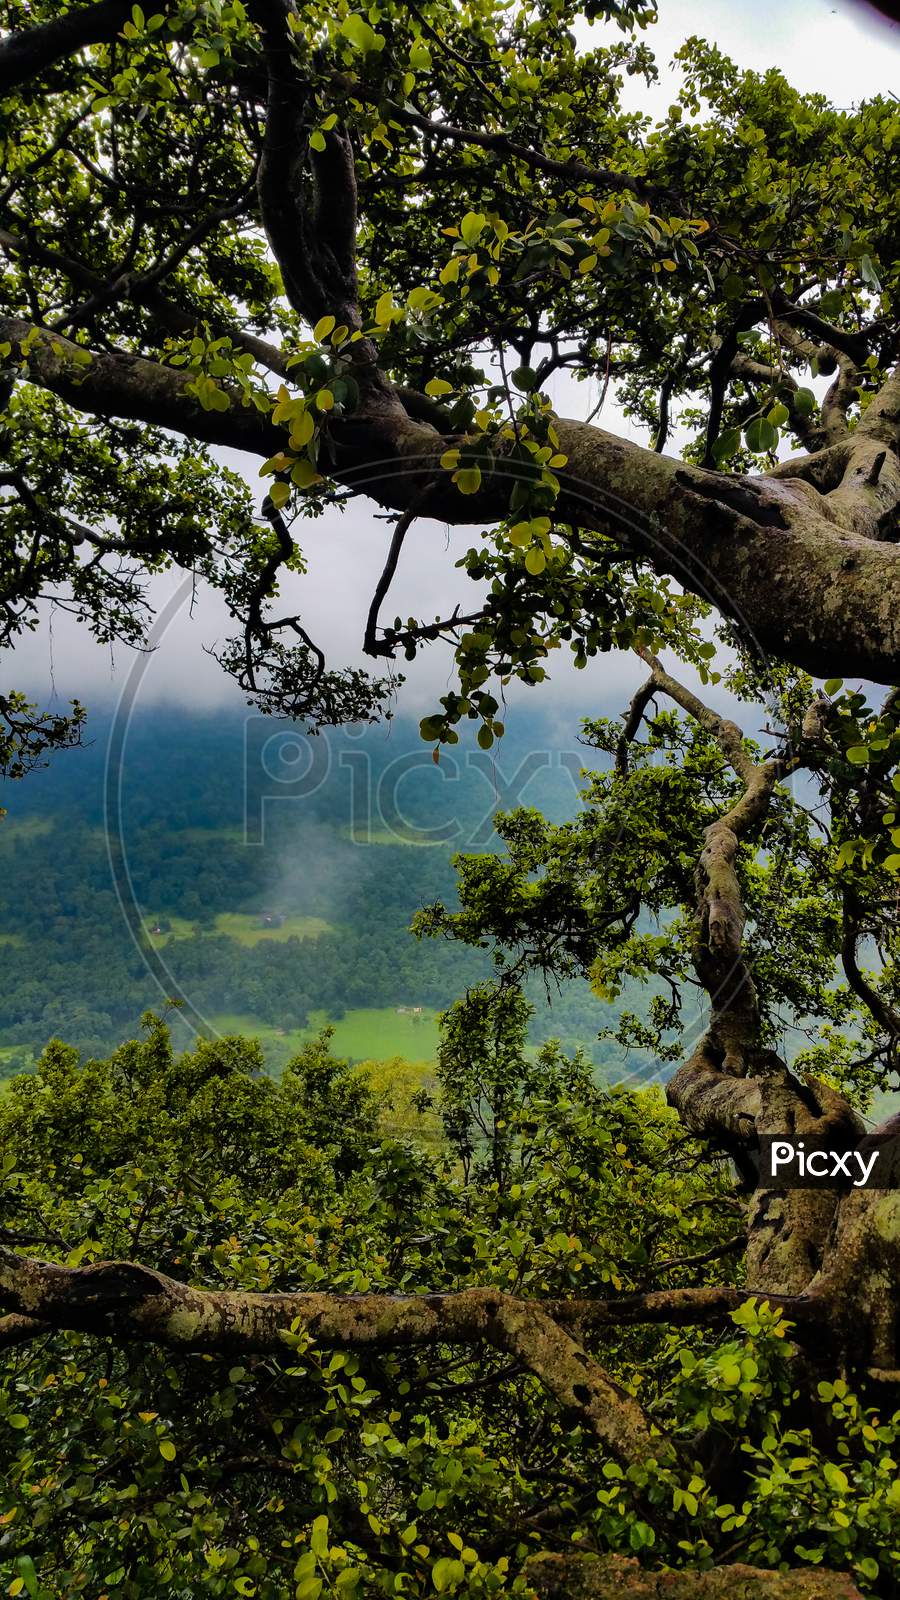 Scenic view of valley in the foreground of a tree on the edge of a mountain in Amrkantak